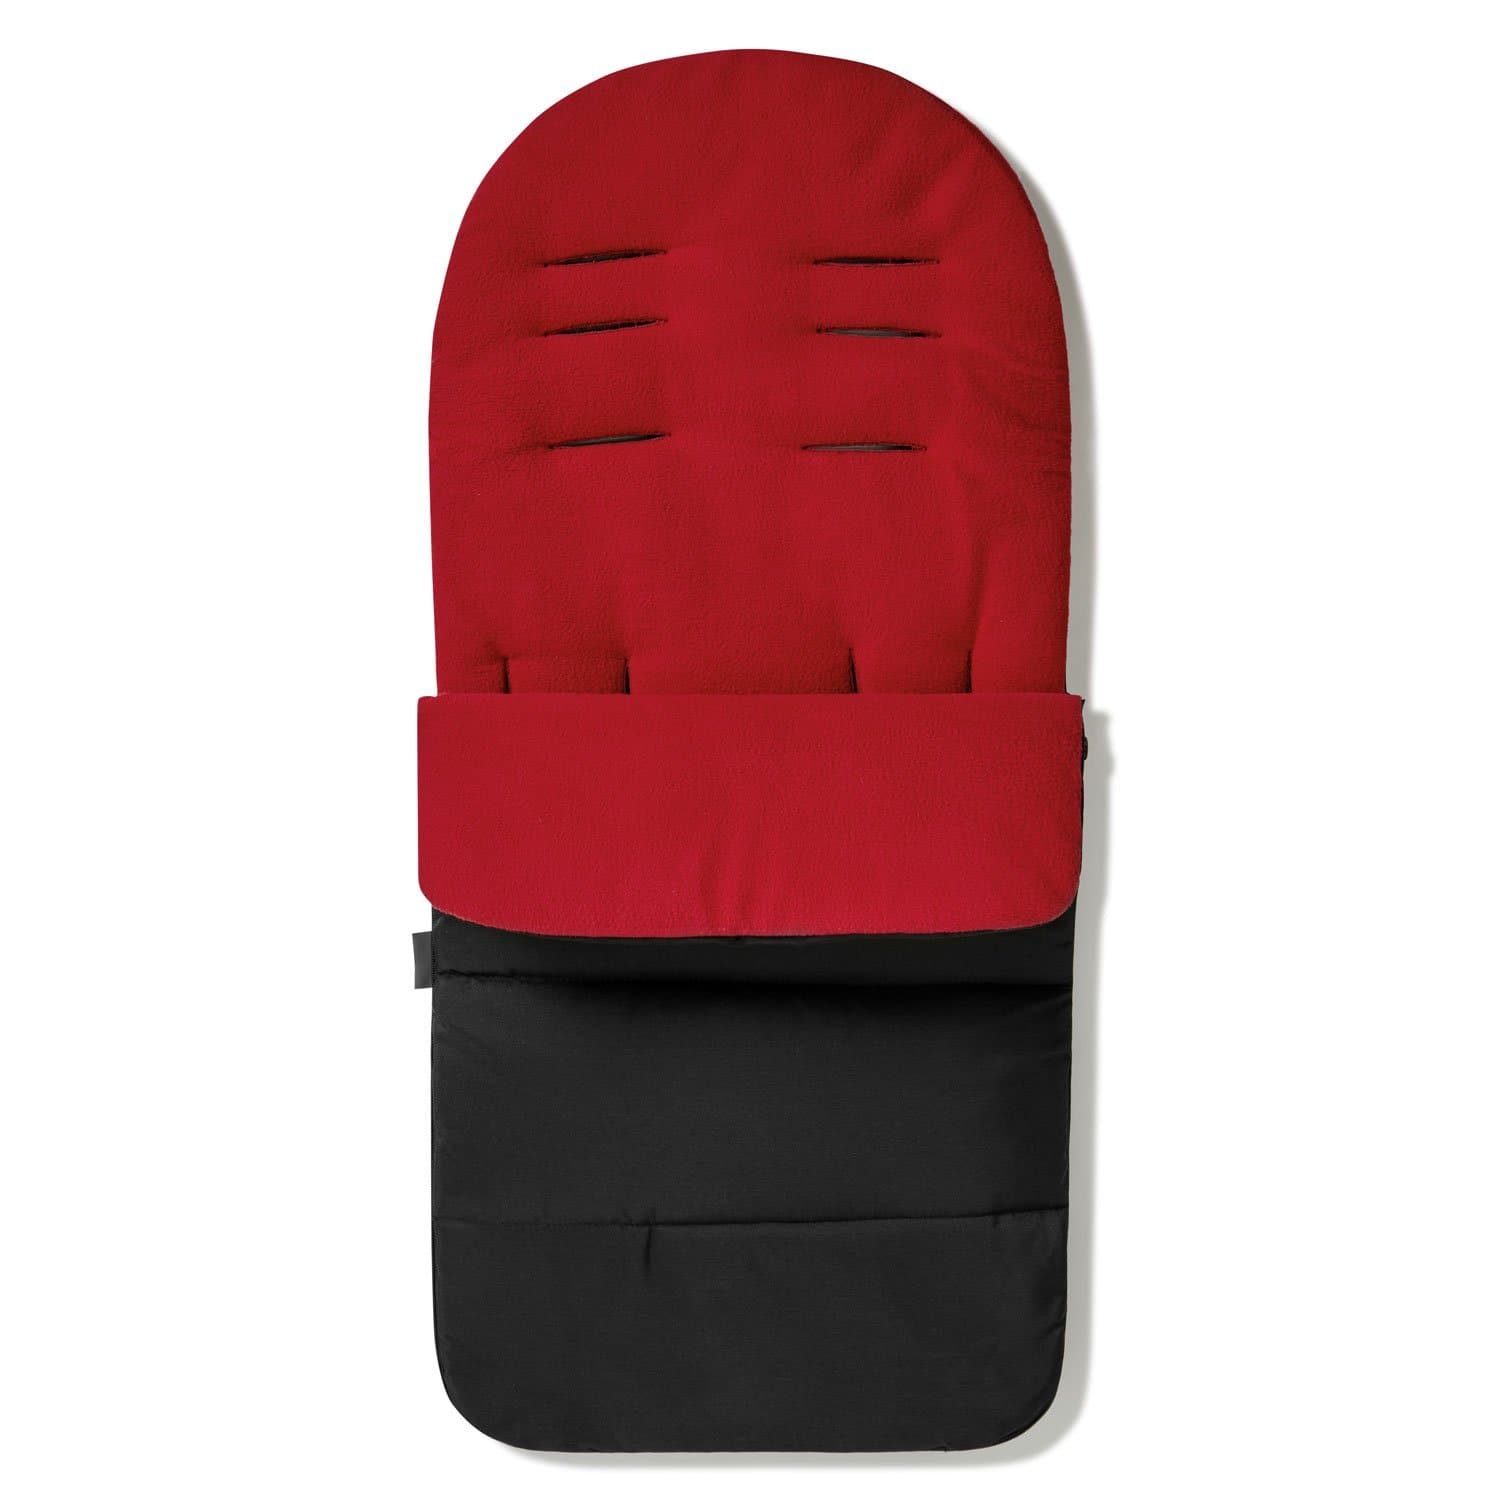 Premium Footmuff / Cosy Toes Compatible with Kinderkraft - For Your Little One